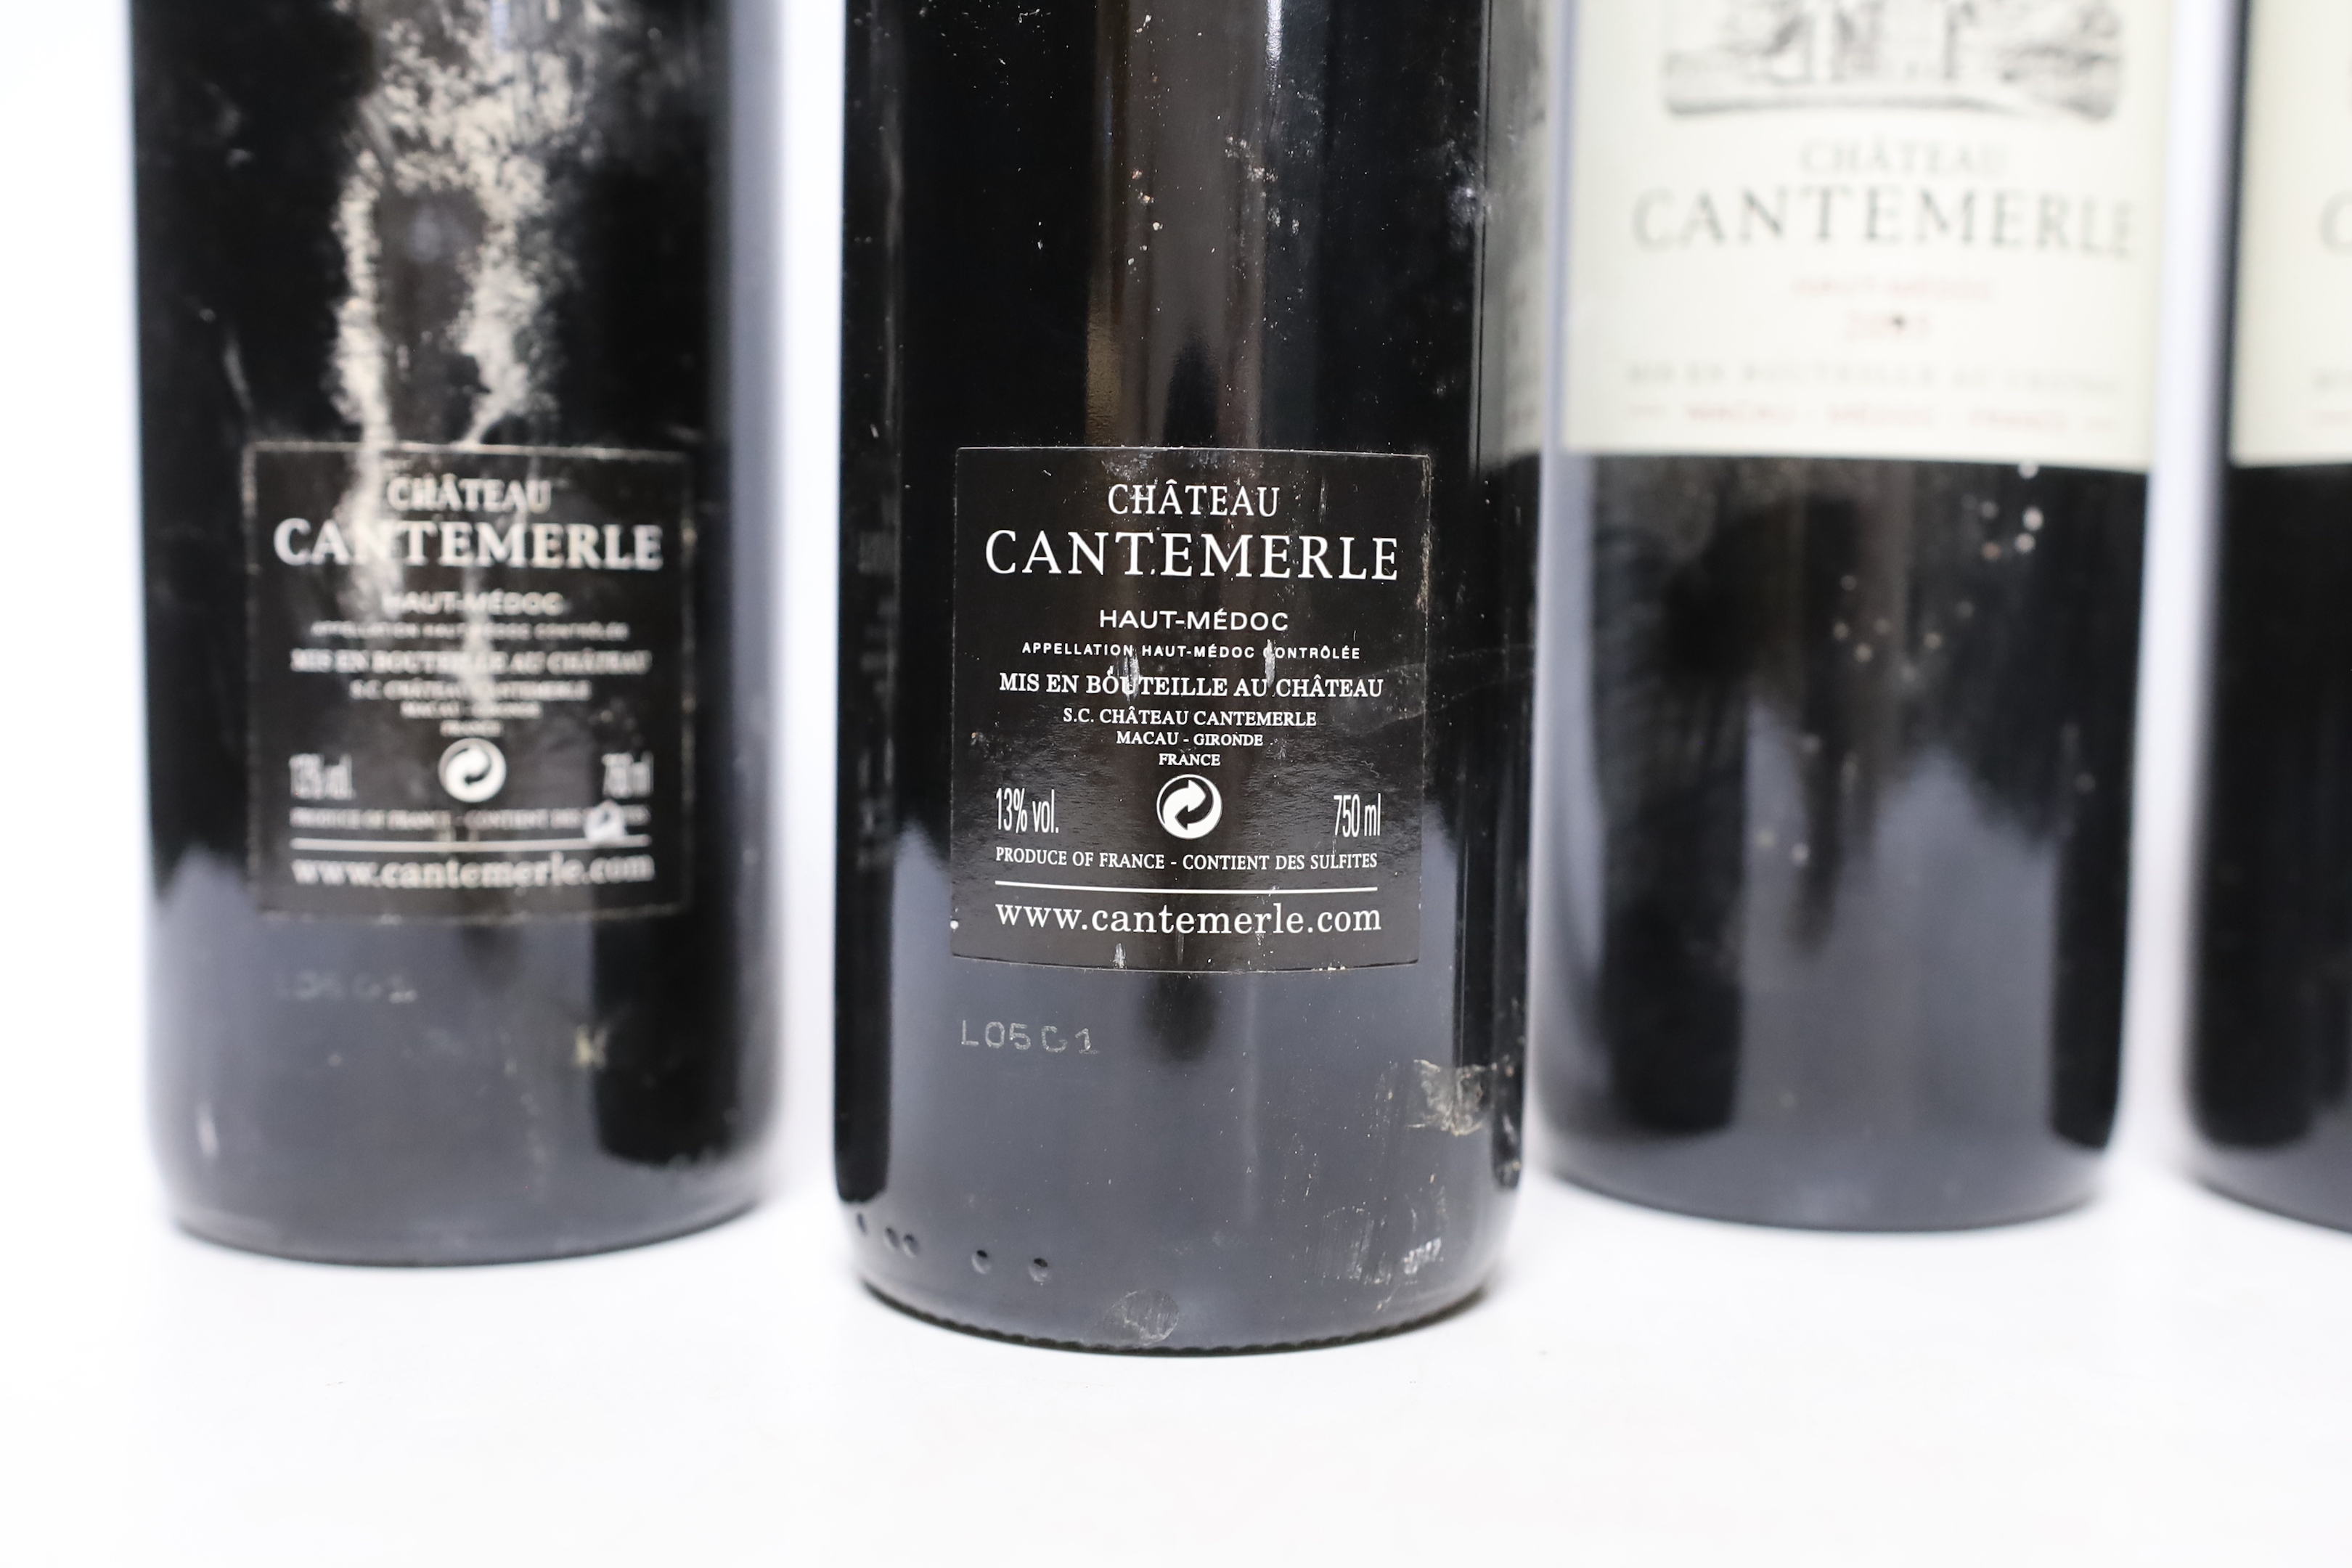 Four bottles of Cantemerle 2009 wine